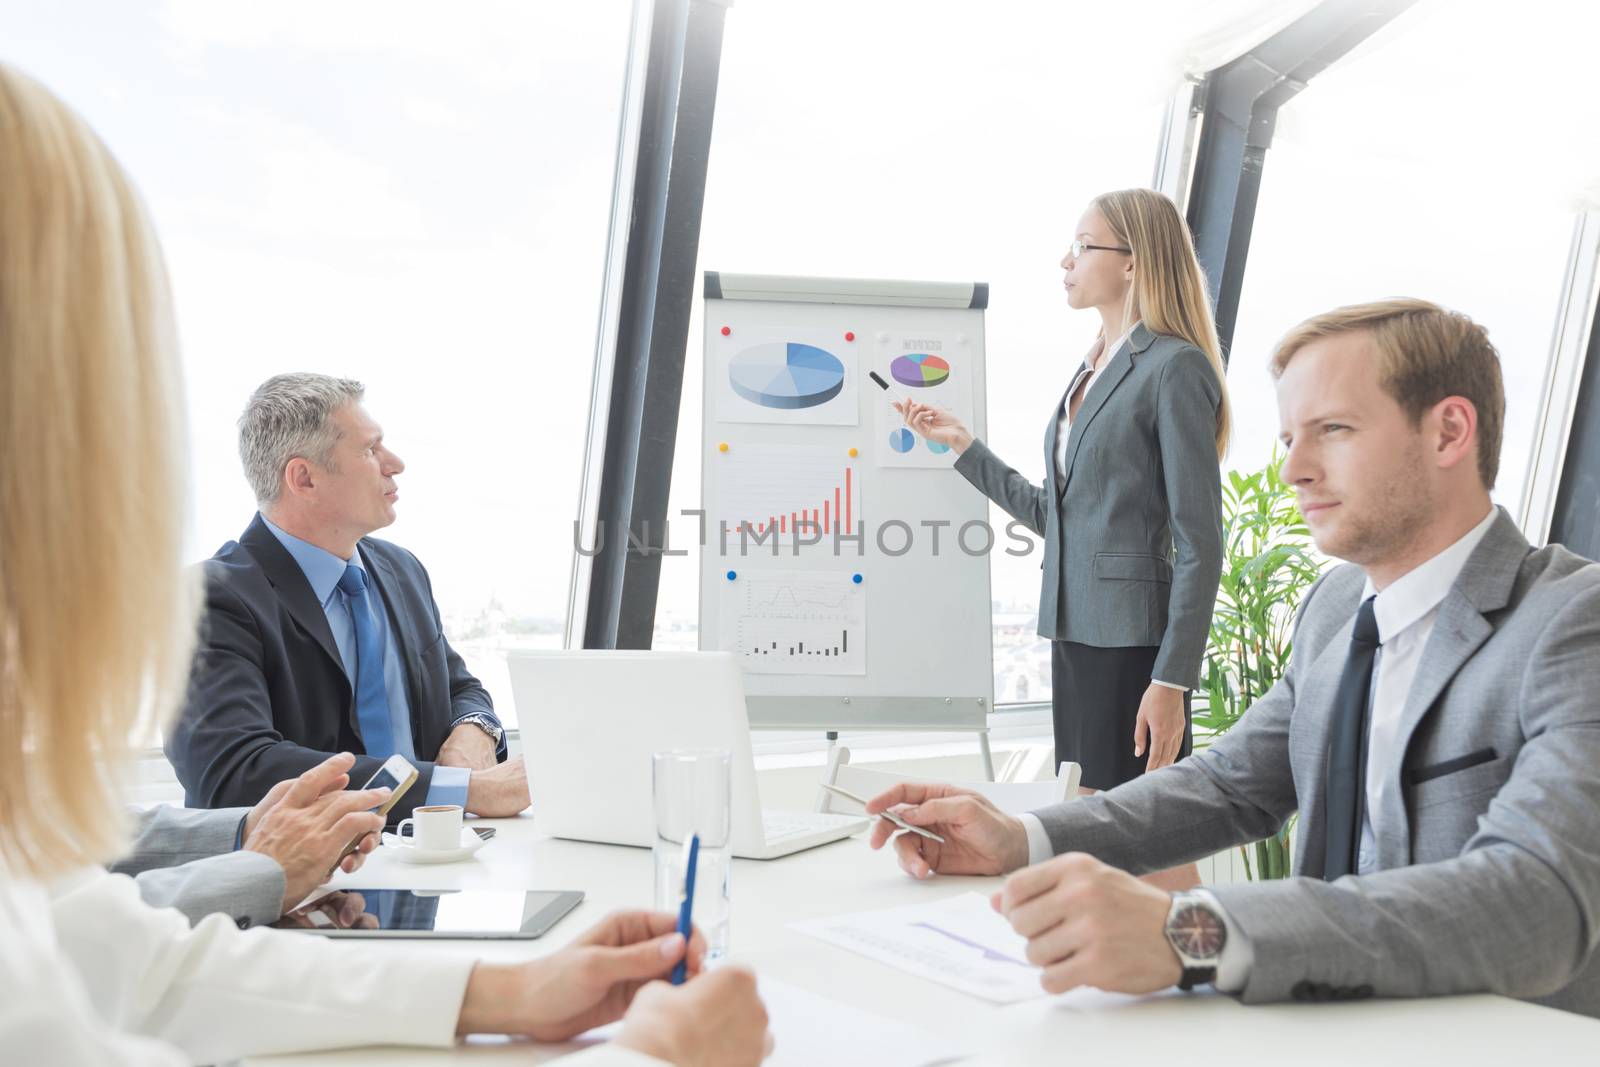 Business presentation of statistics, business woman pointing at flipchart, team of people at meeting table watching